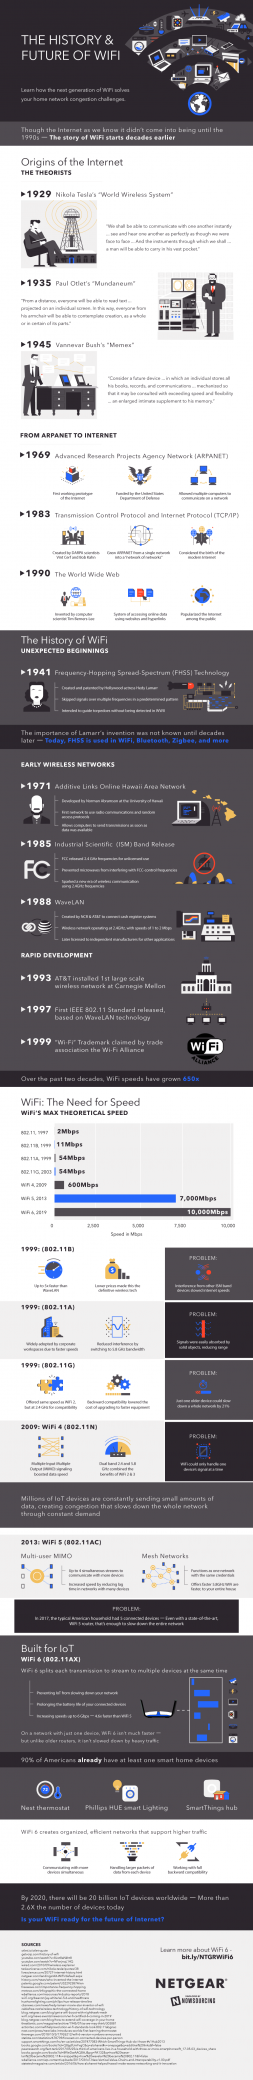 Move Over, WiFi5. WiFi6 Is Almost Here [Infographic]